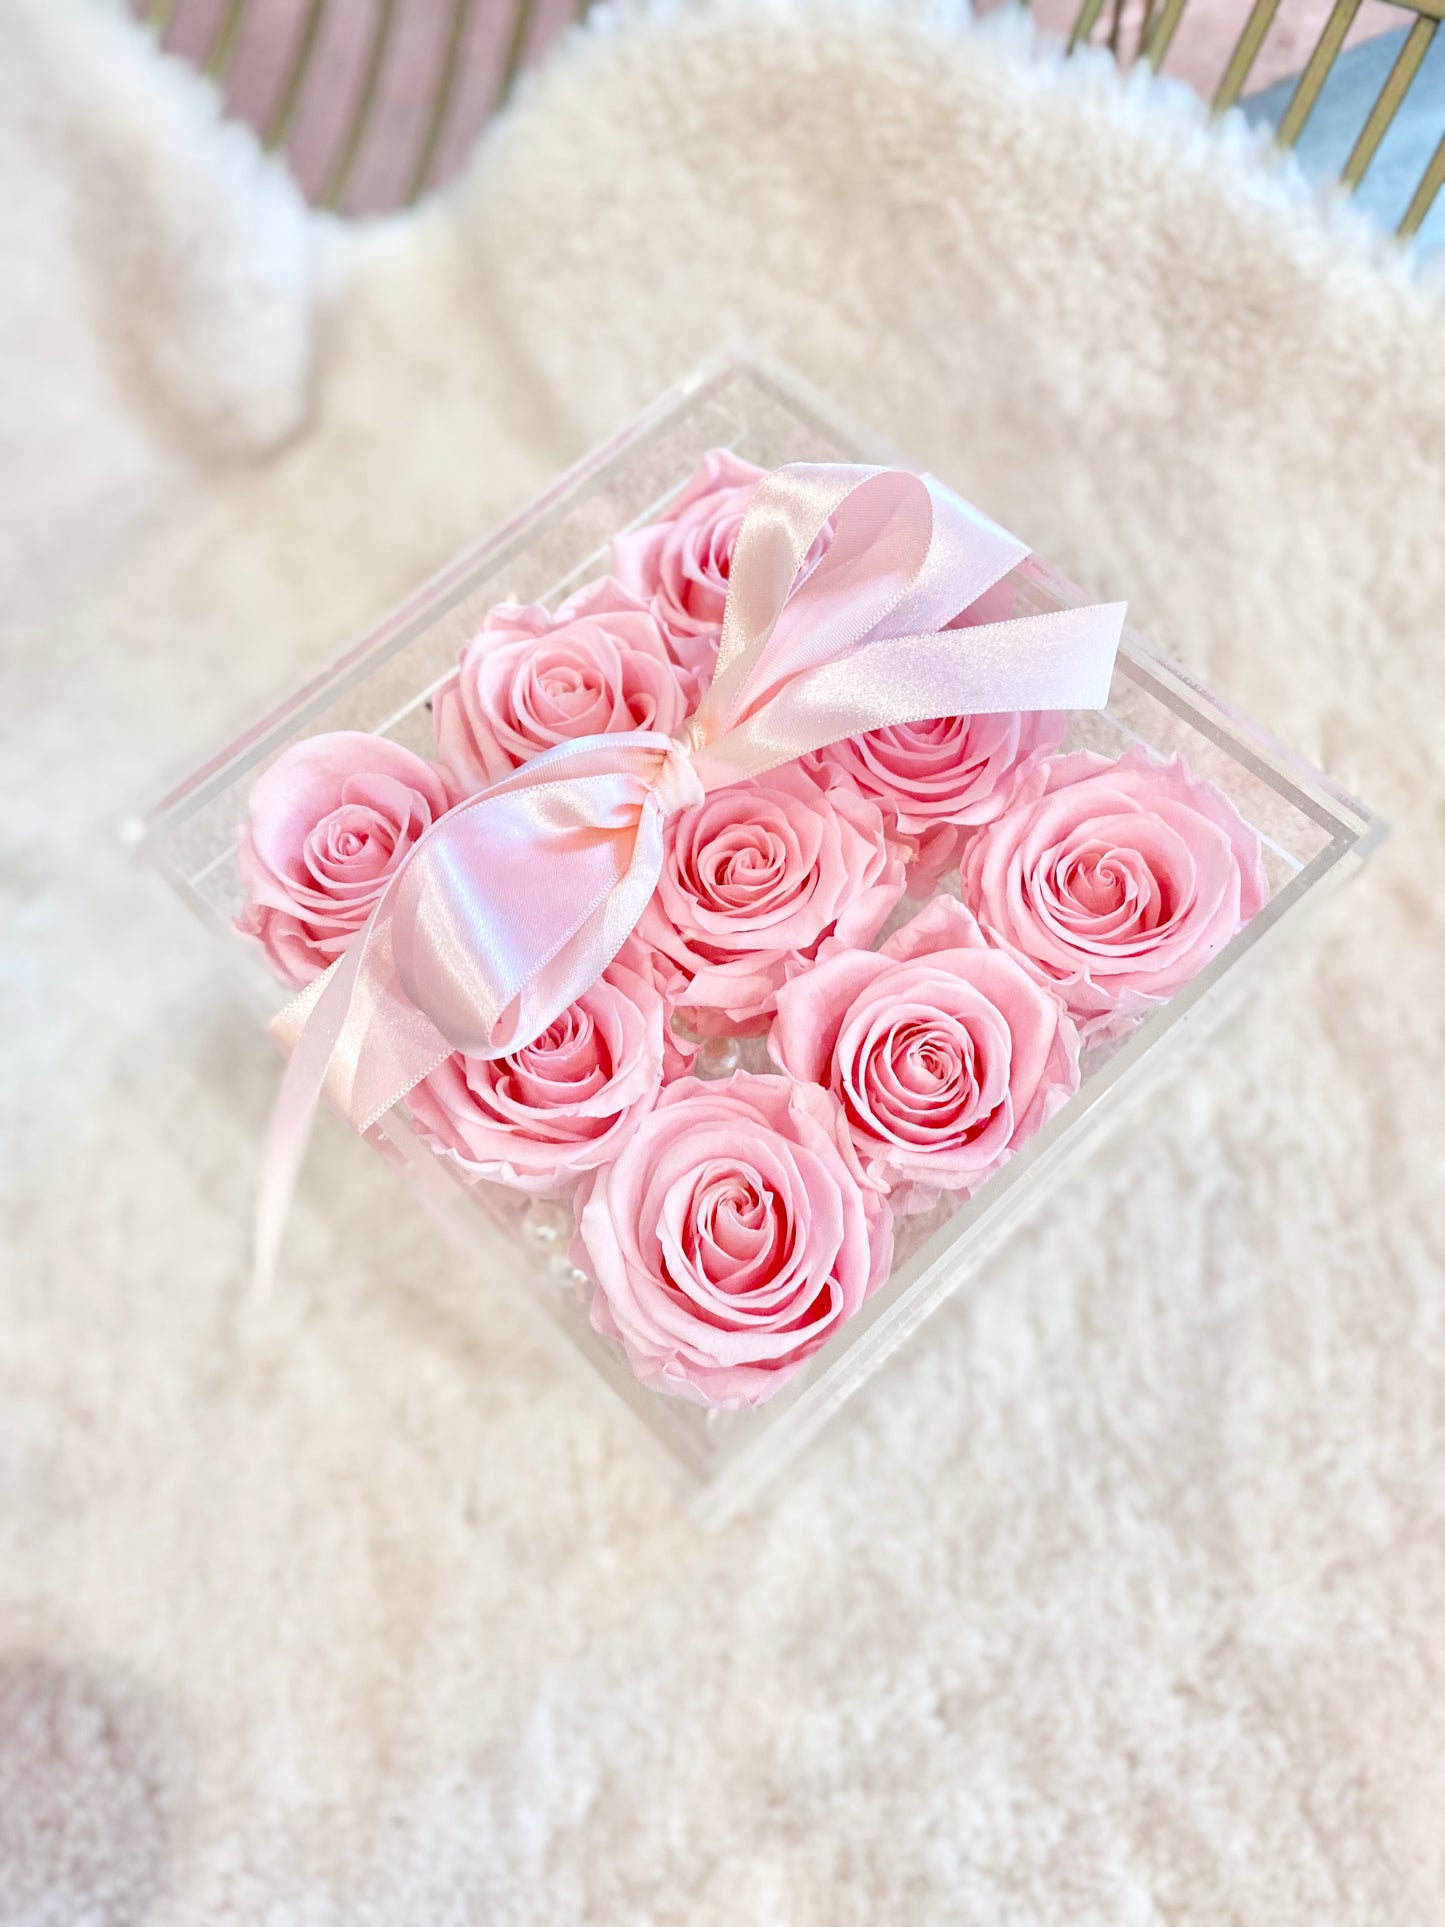 Preserved Rose Jewelry Box - Nine Pink Roses